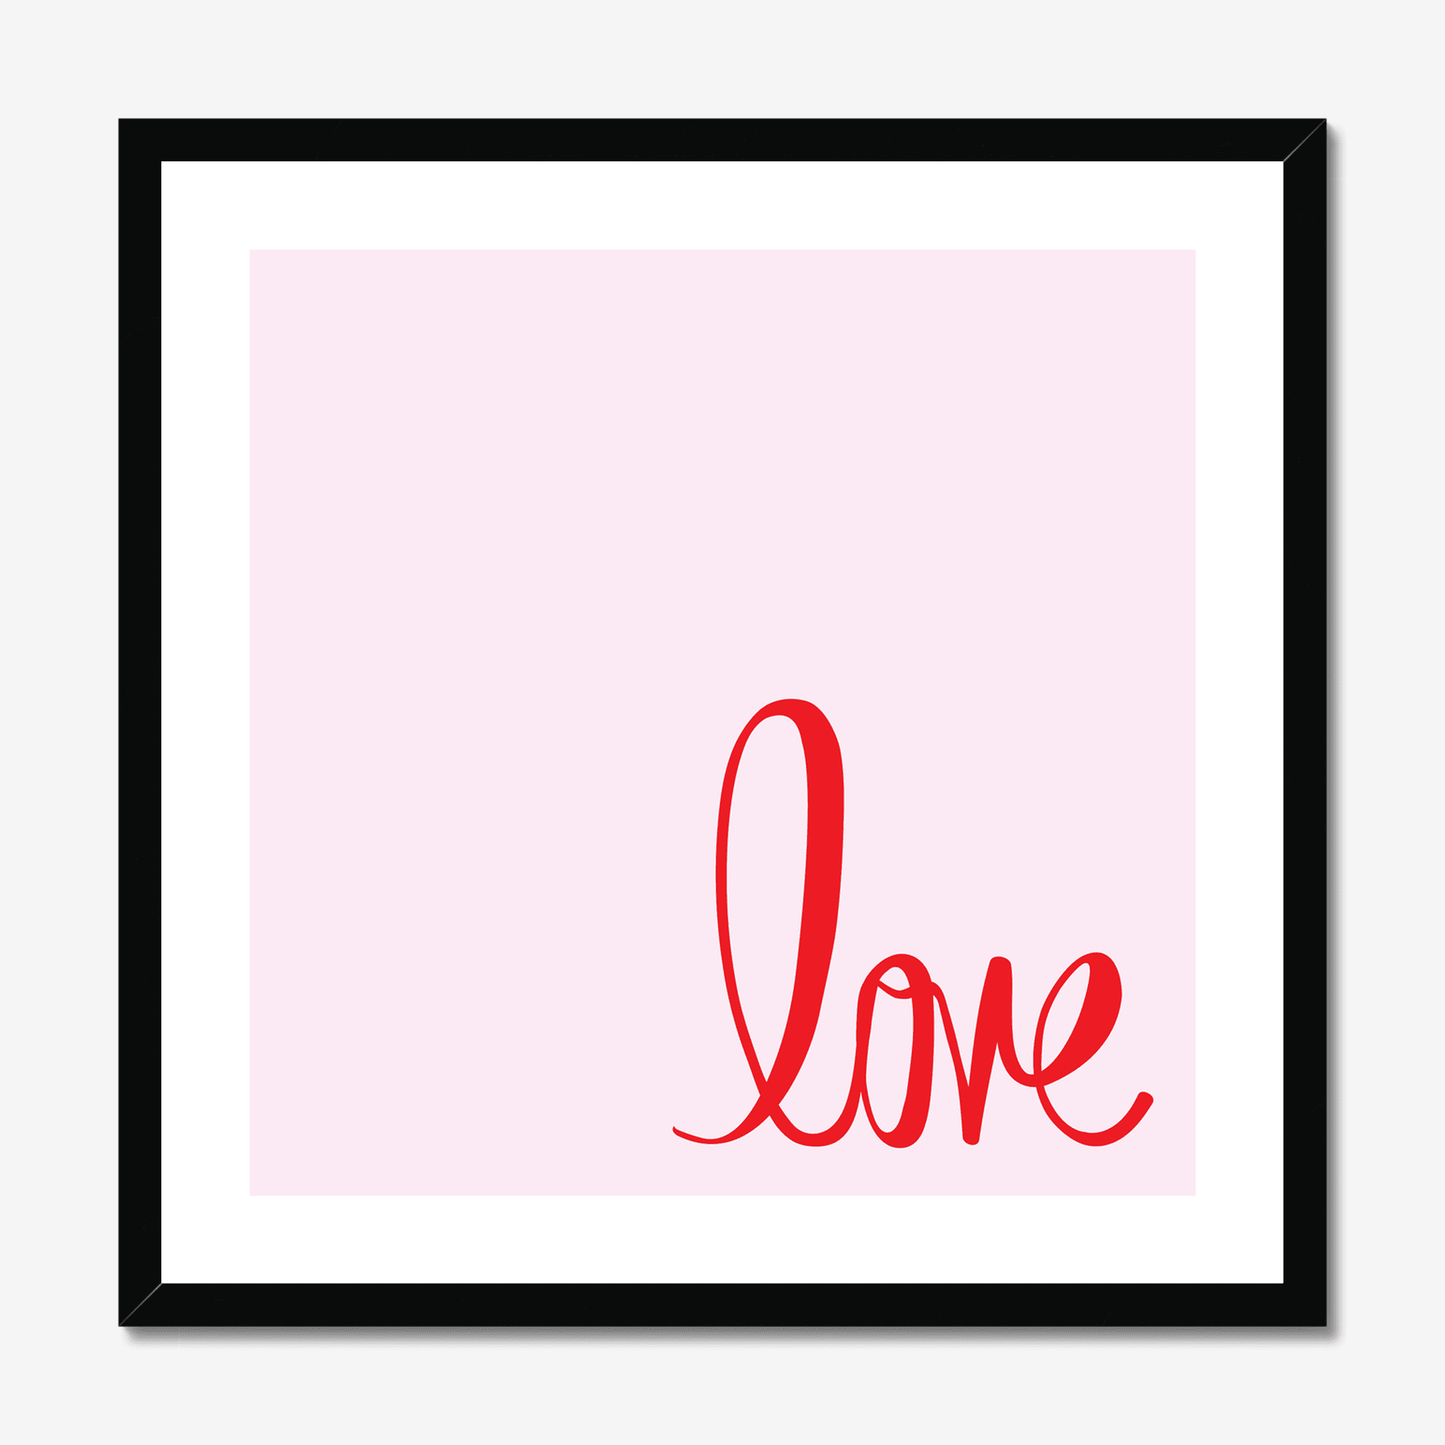 Love, square art print. A pretty and romantic print, making a special gift or treat for yourself. A pretty red font on a pink background with a white border.